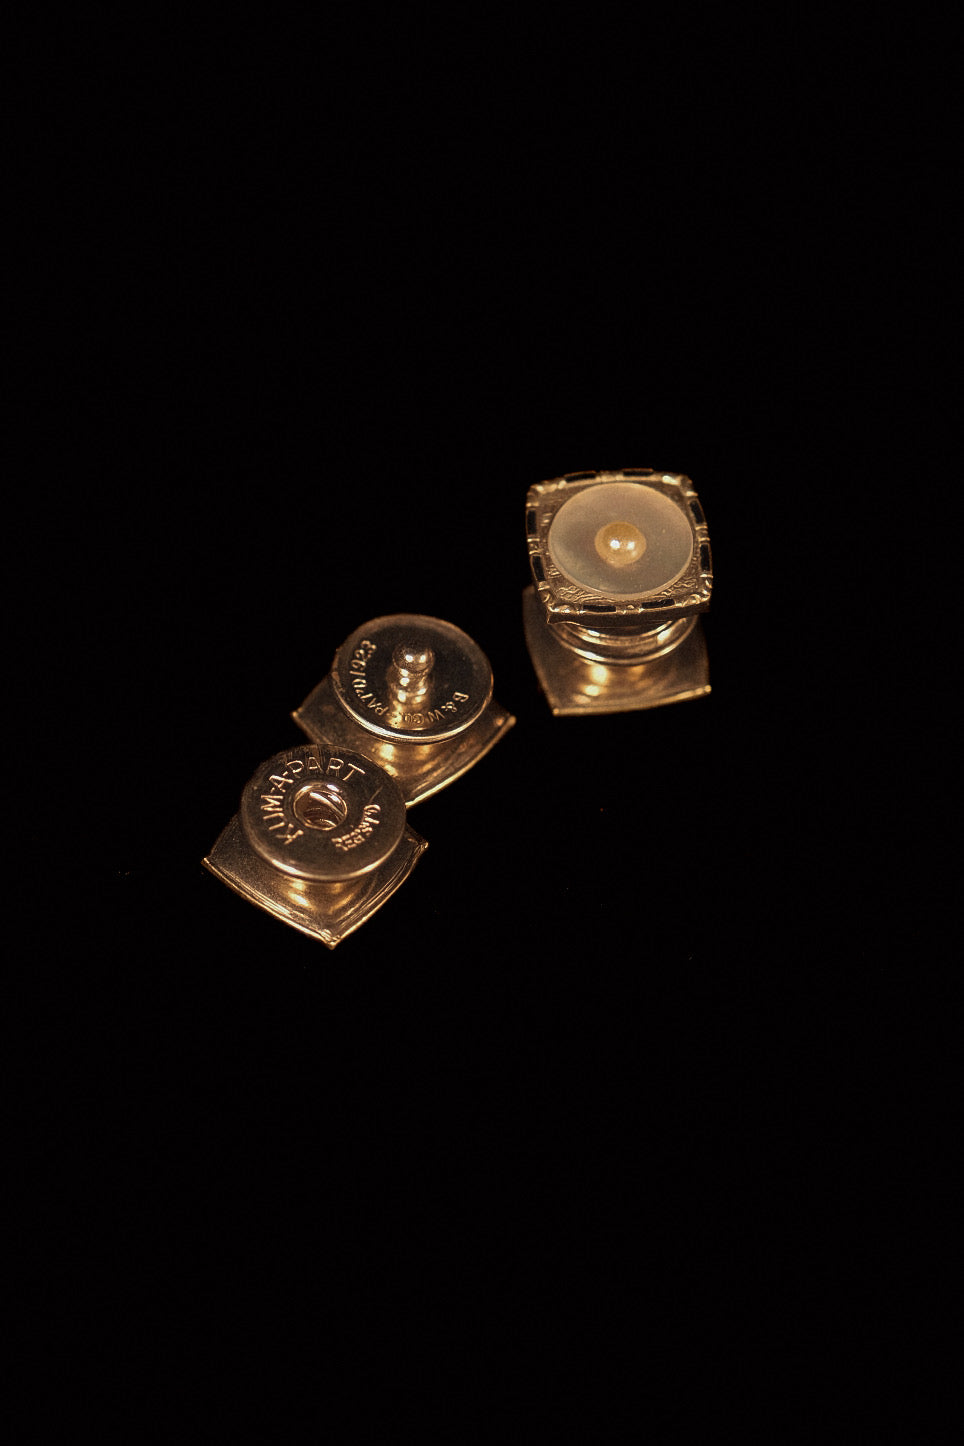 1920s Square Snap Cufflinks With Mother Of Pearl Centre By Kum-A-Part